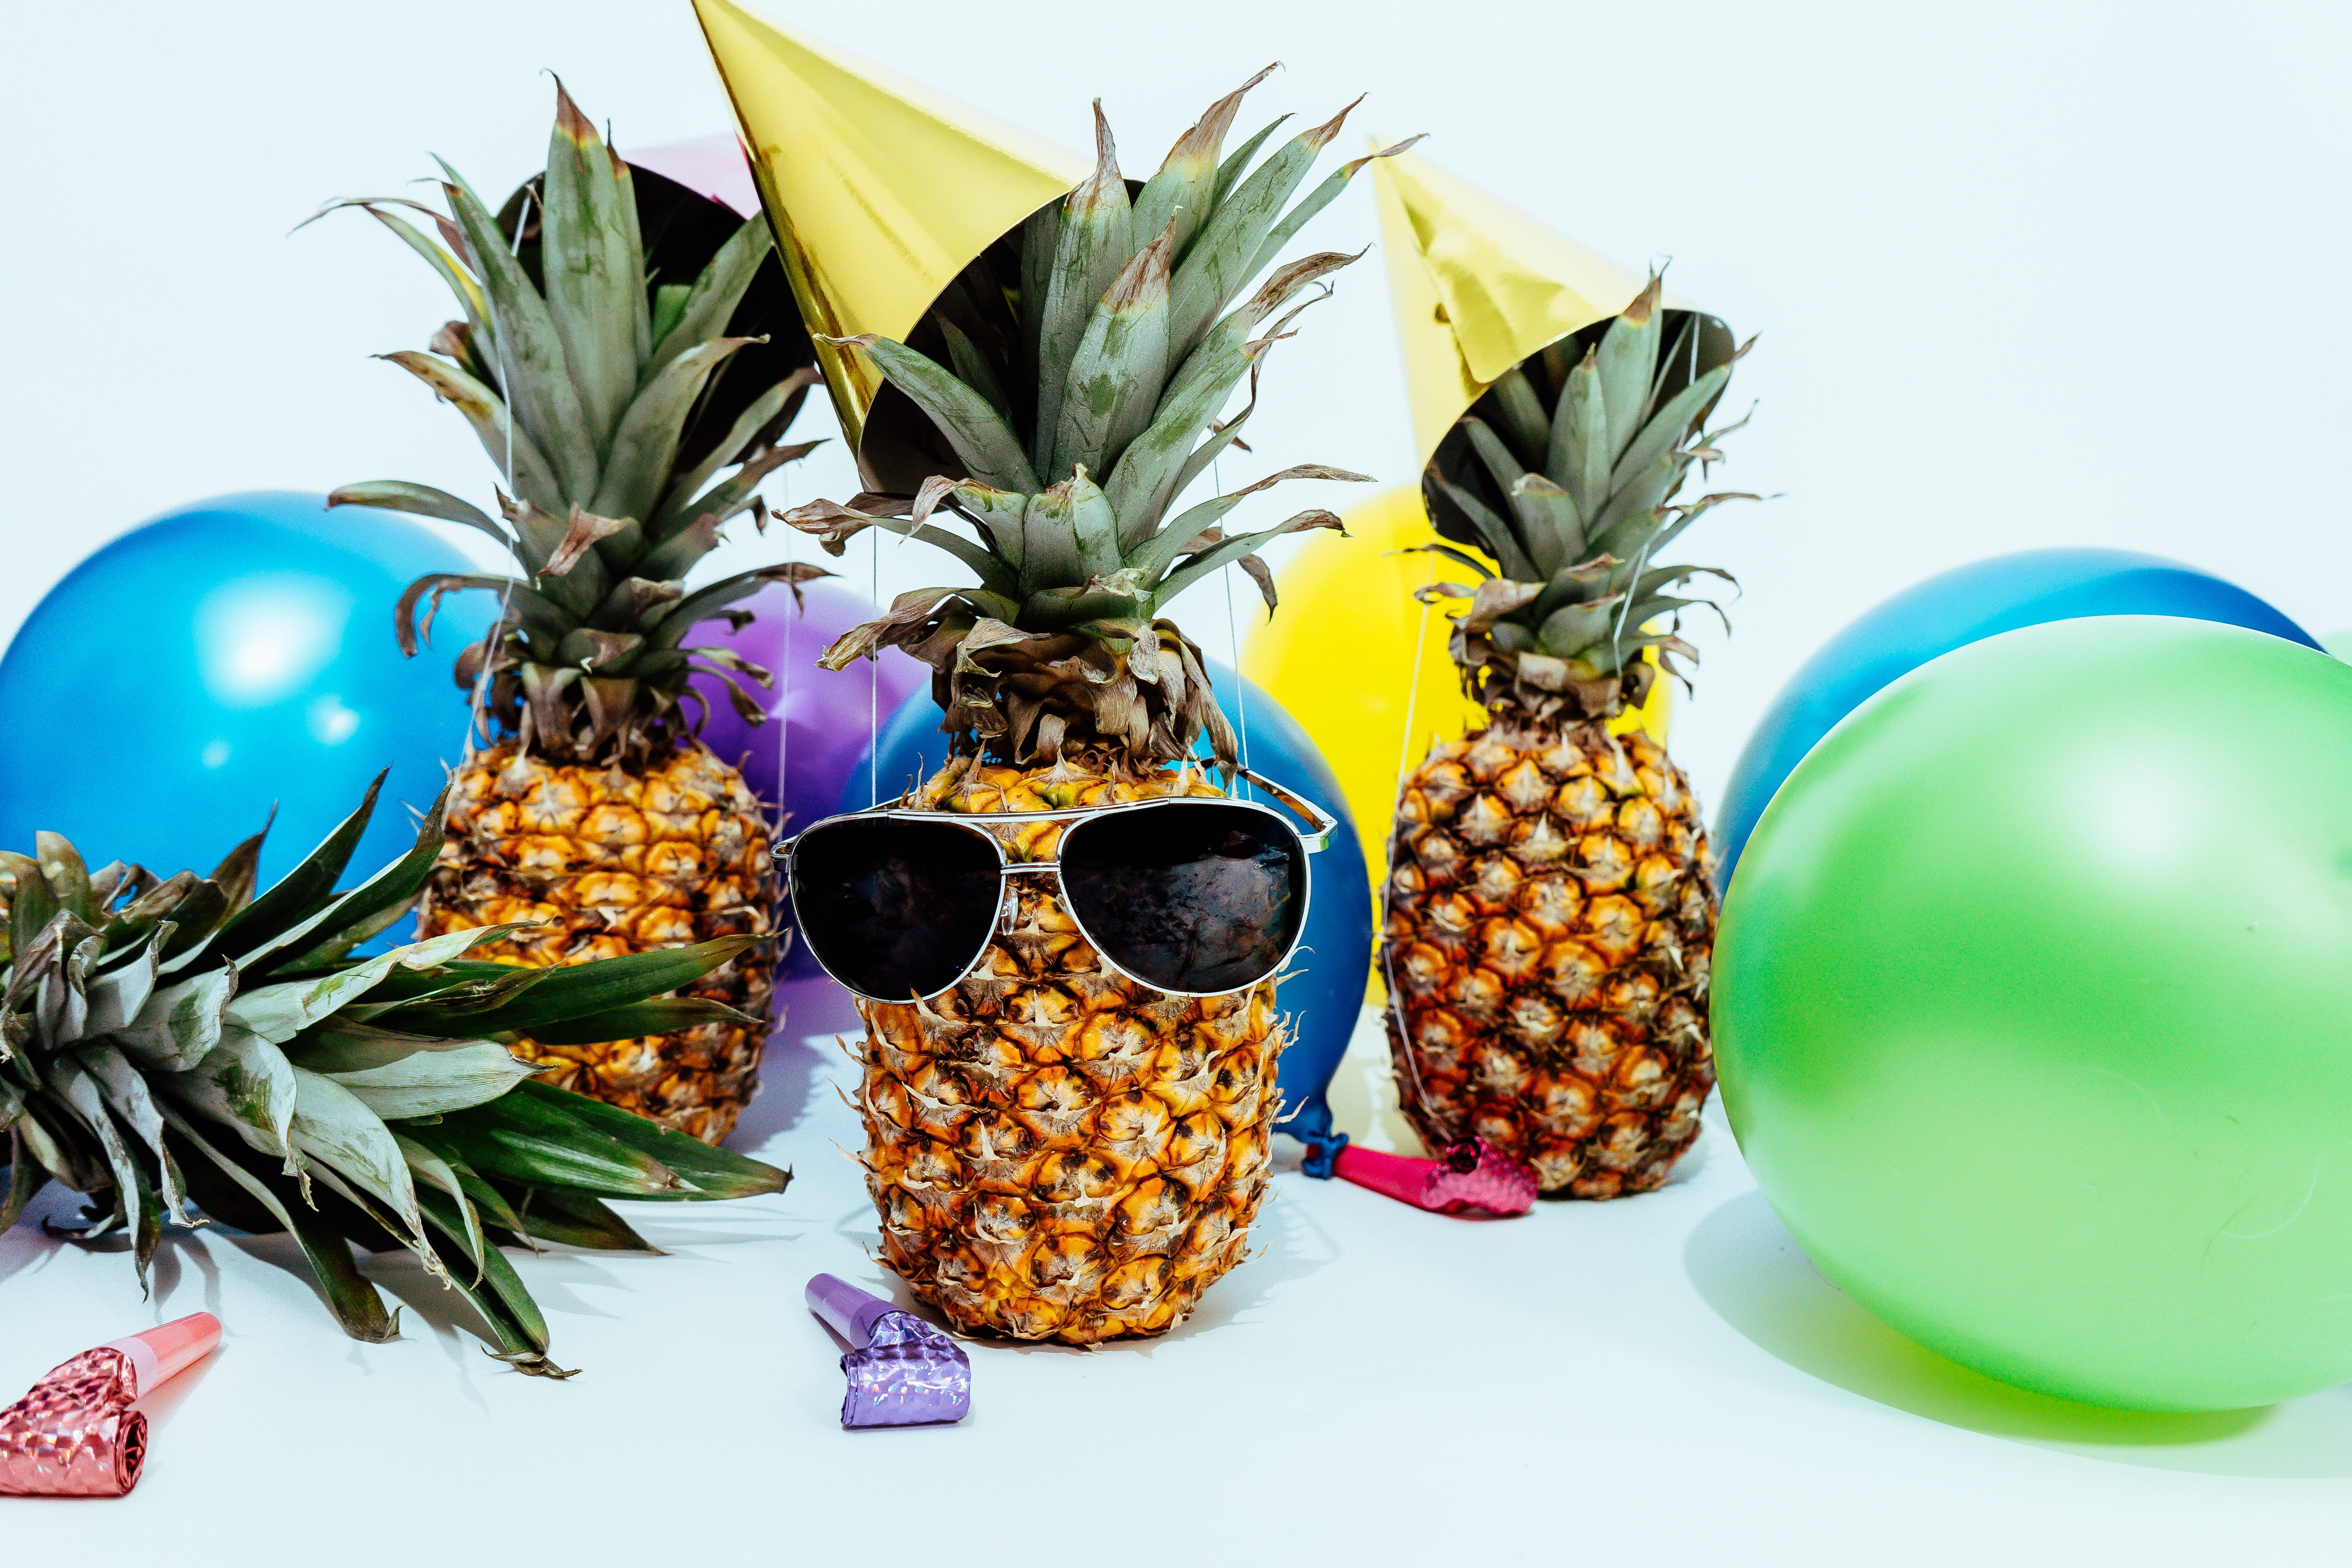 A funny image of balloons and pineapples, one of which is wearing sunglasses.